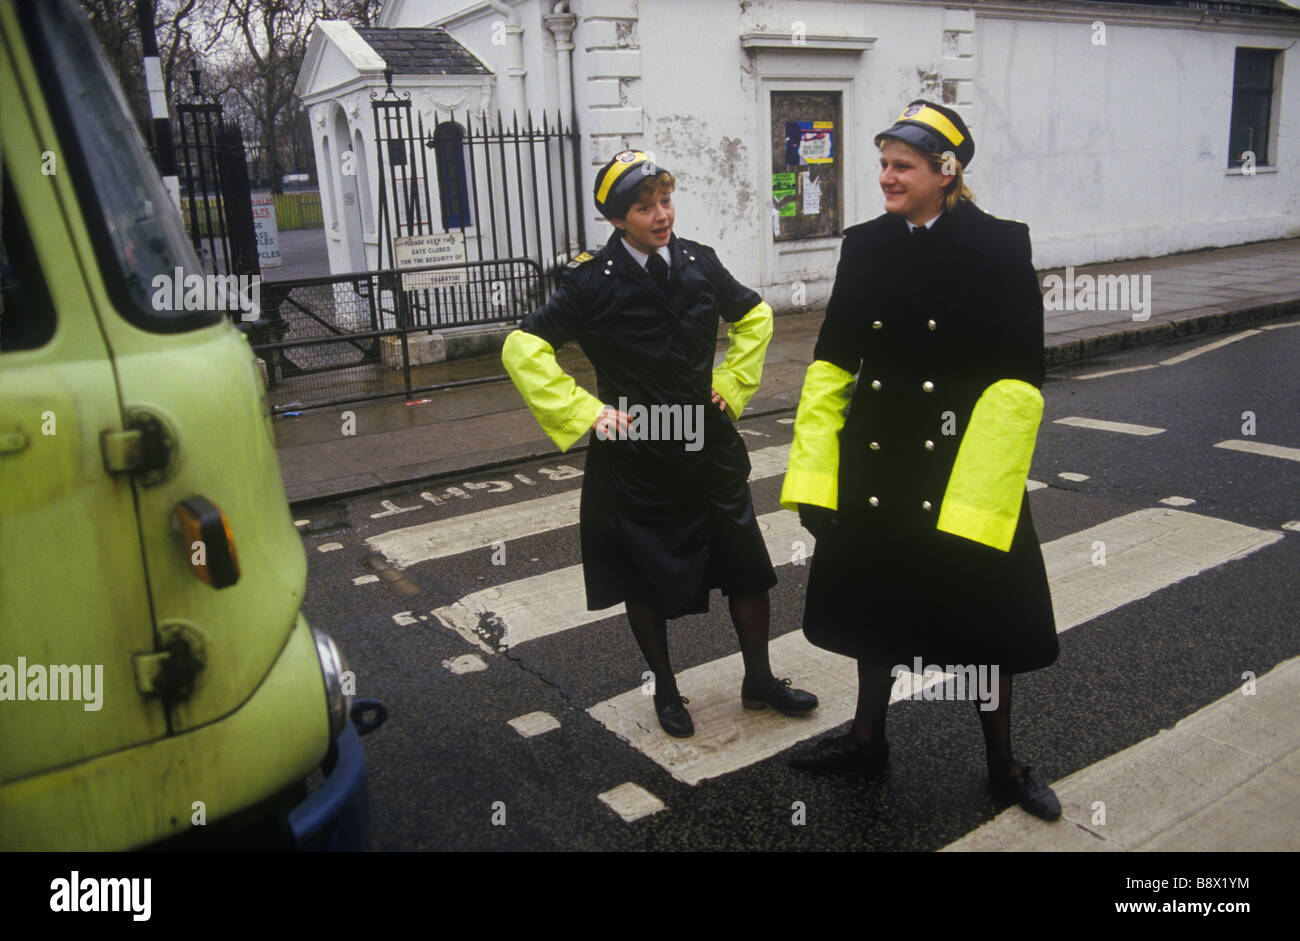 Traffic Wardens pedestrian crossing duty central London UK. Having a bit of fun with the lorry driver. 1985 1980s England HOMER SYKES Stock Photo